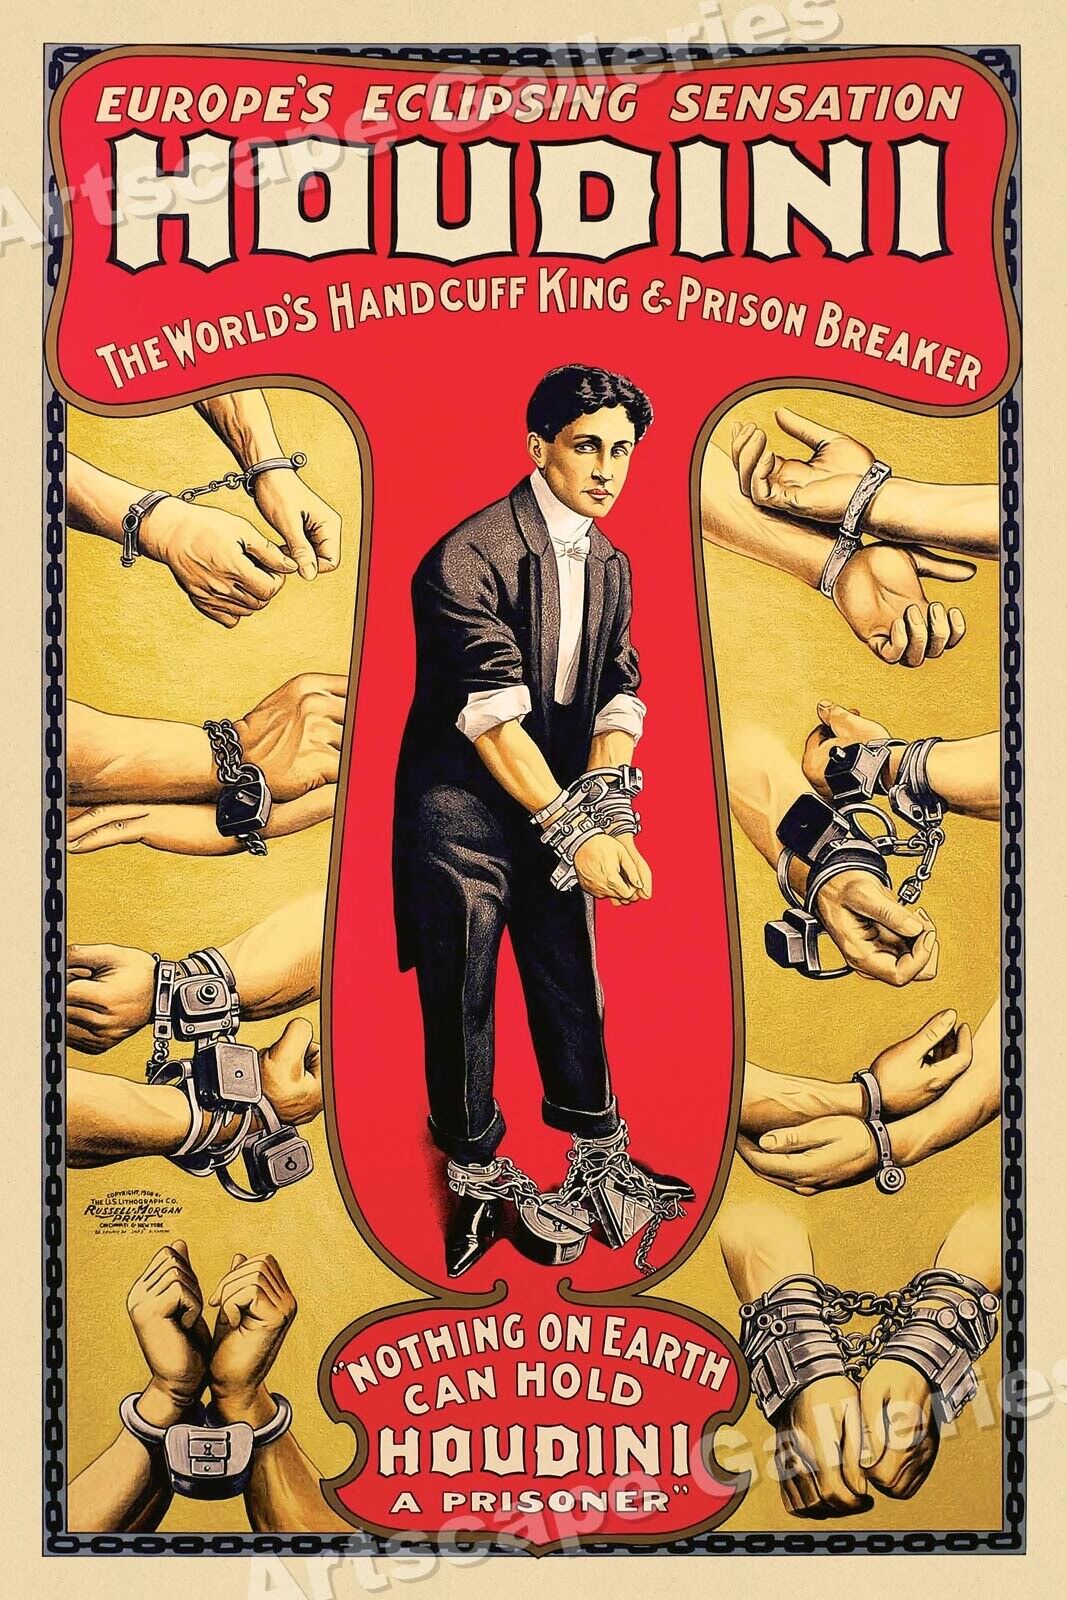 Houdini Handcuff King 1920's Vintage Style Magic Poster - 16x24